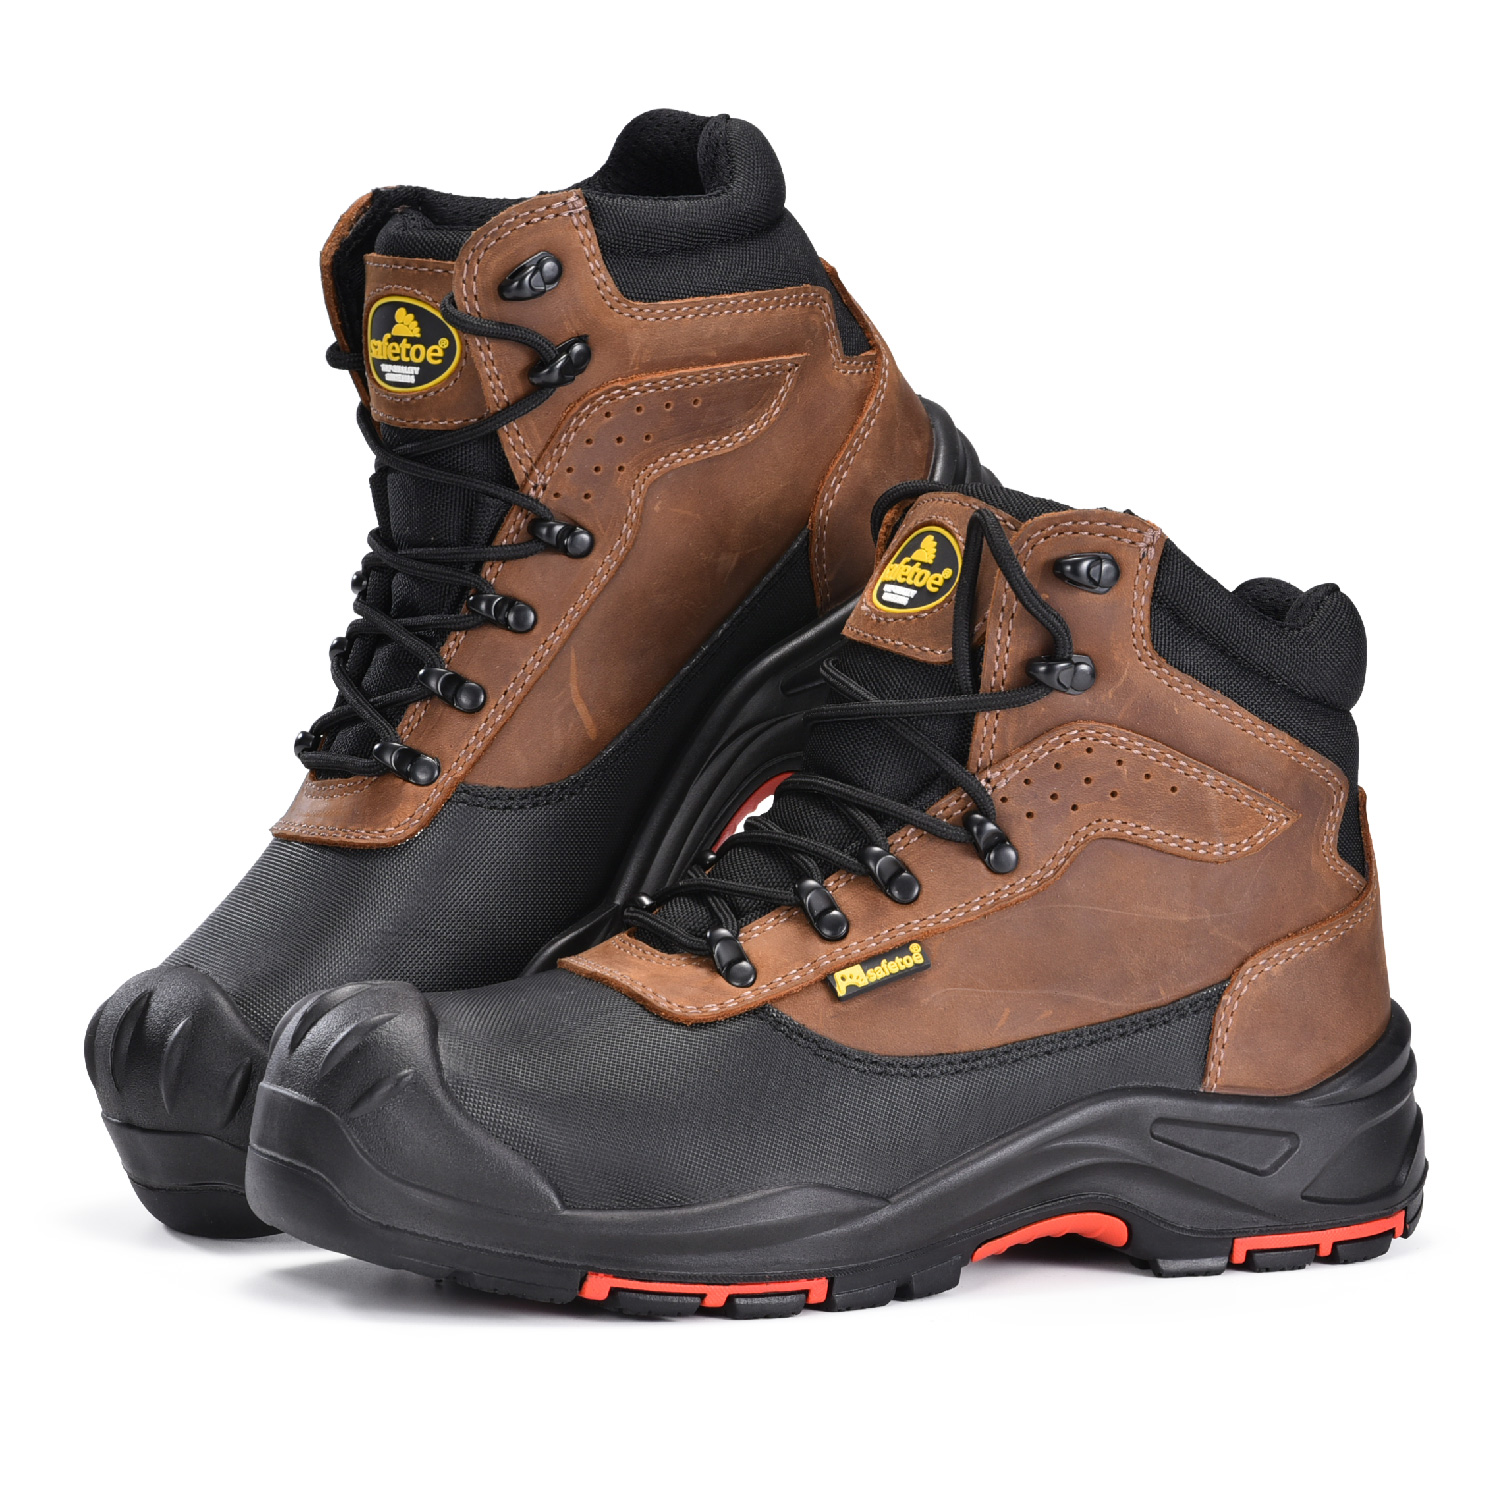 Most Comfortable Nubuck Leather Slip Resistant Safety Boots With Composite Toe for Men M-8563